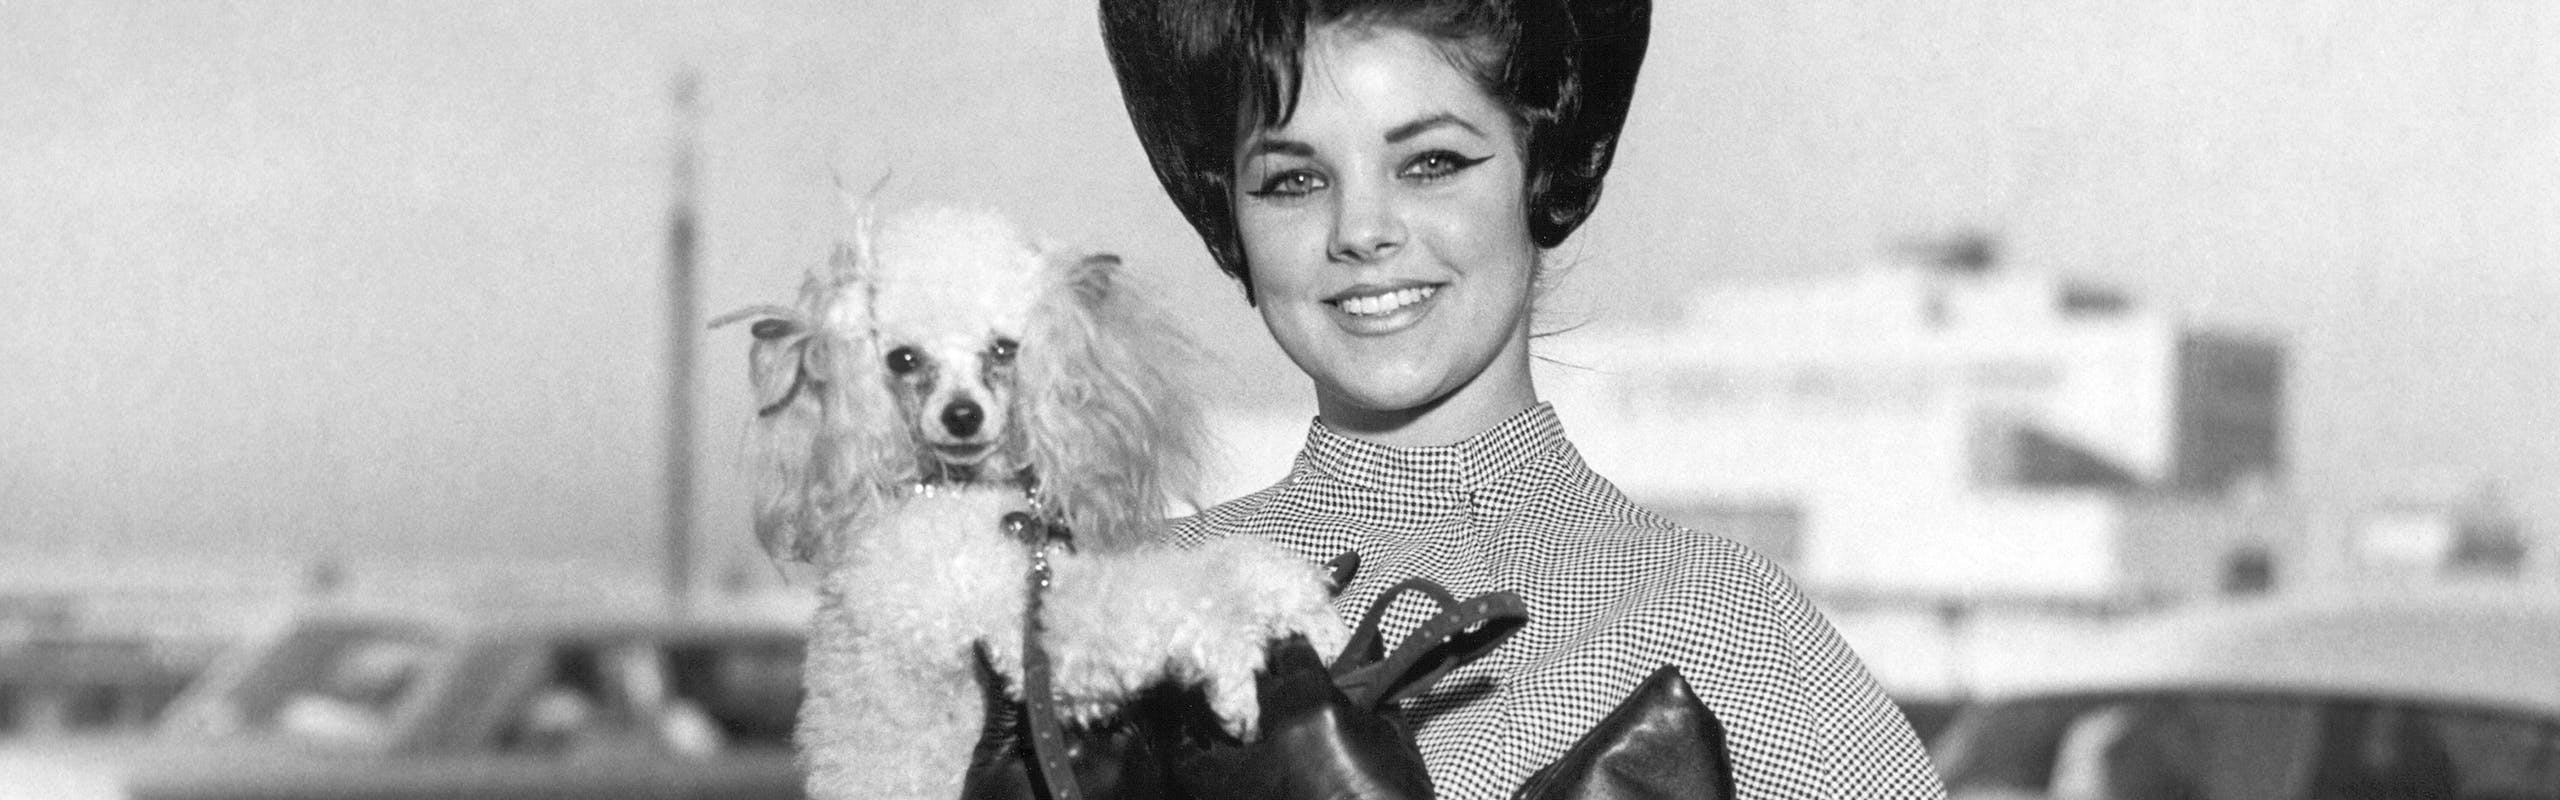 Priscilla Presley Young with dog and gloves